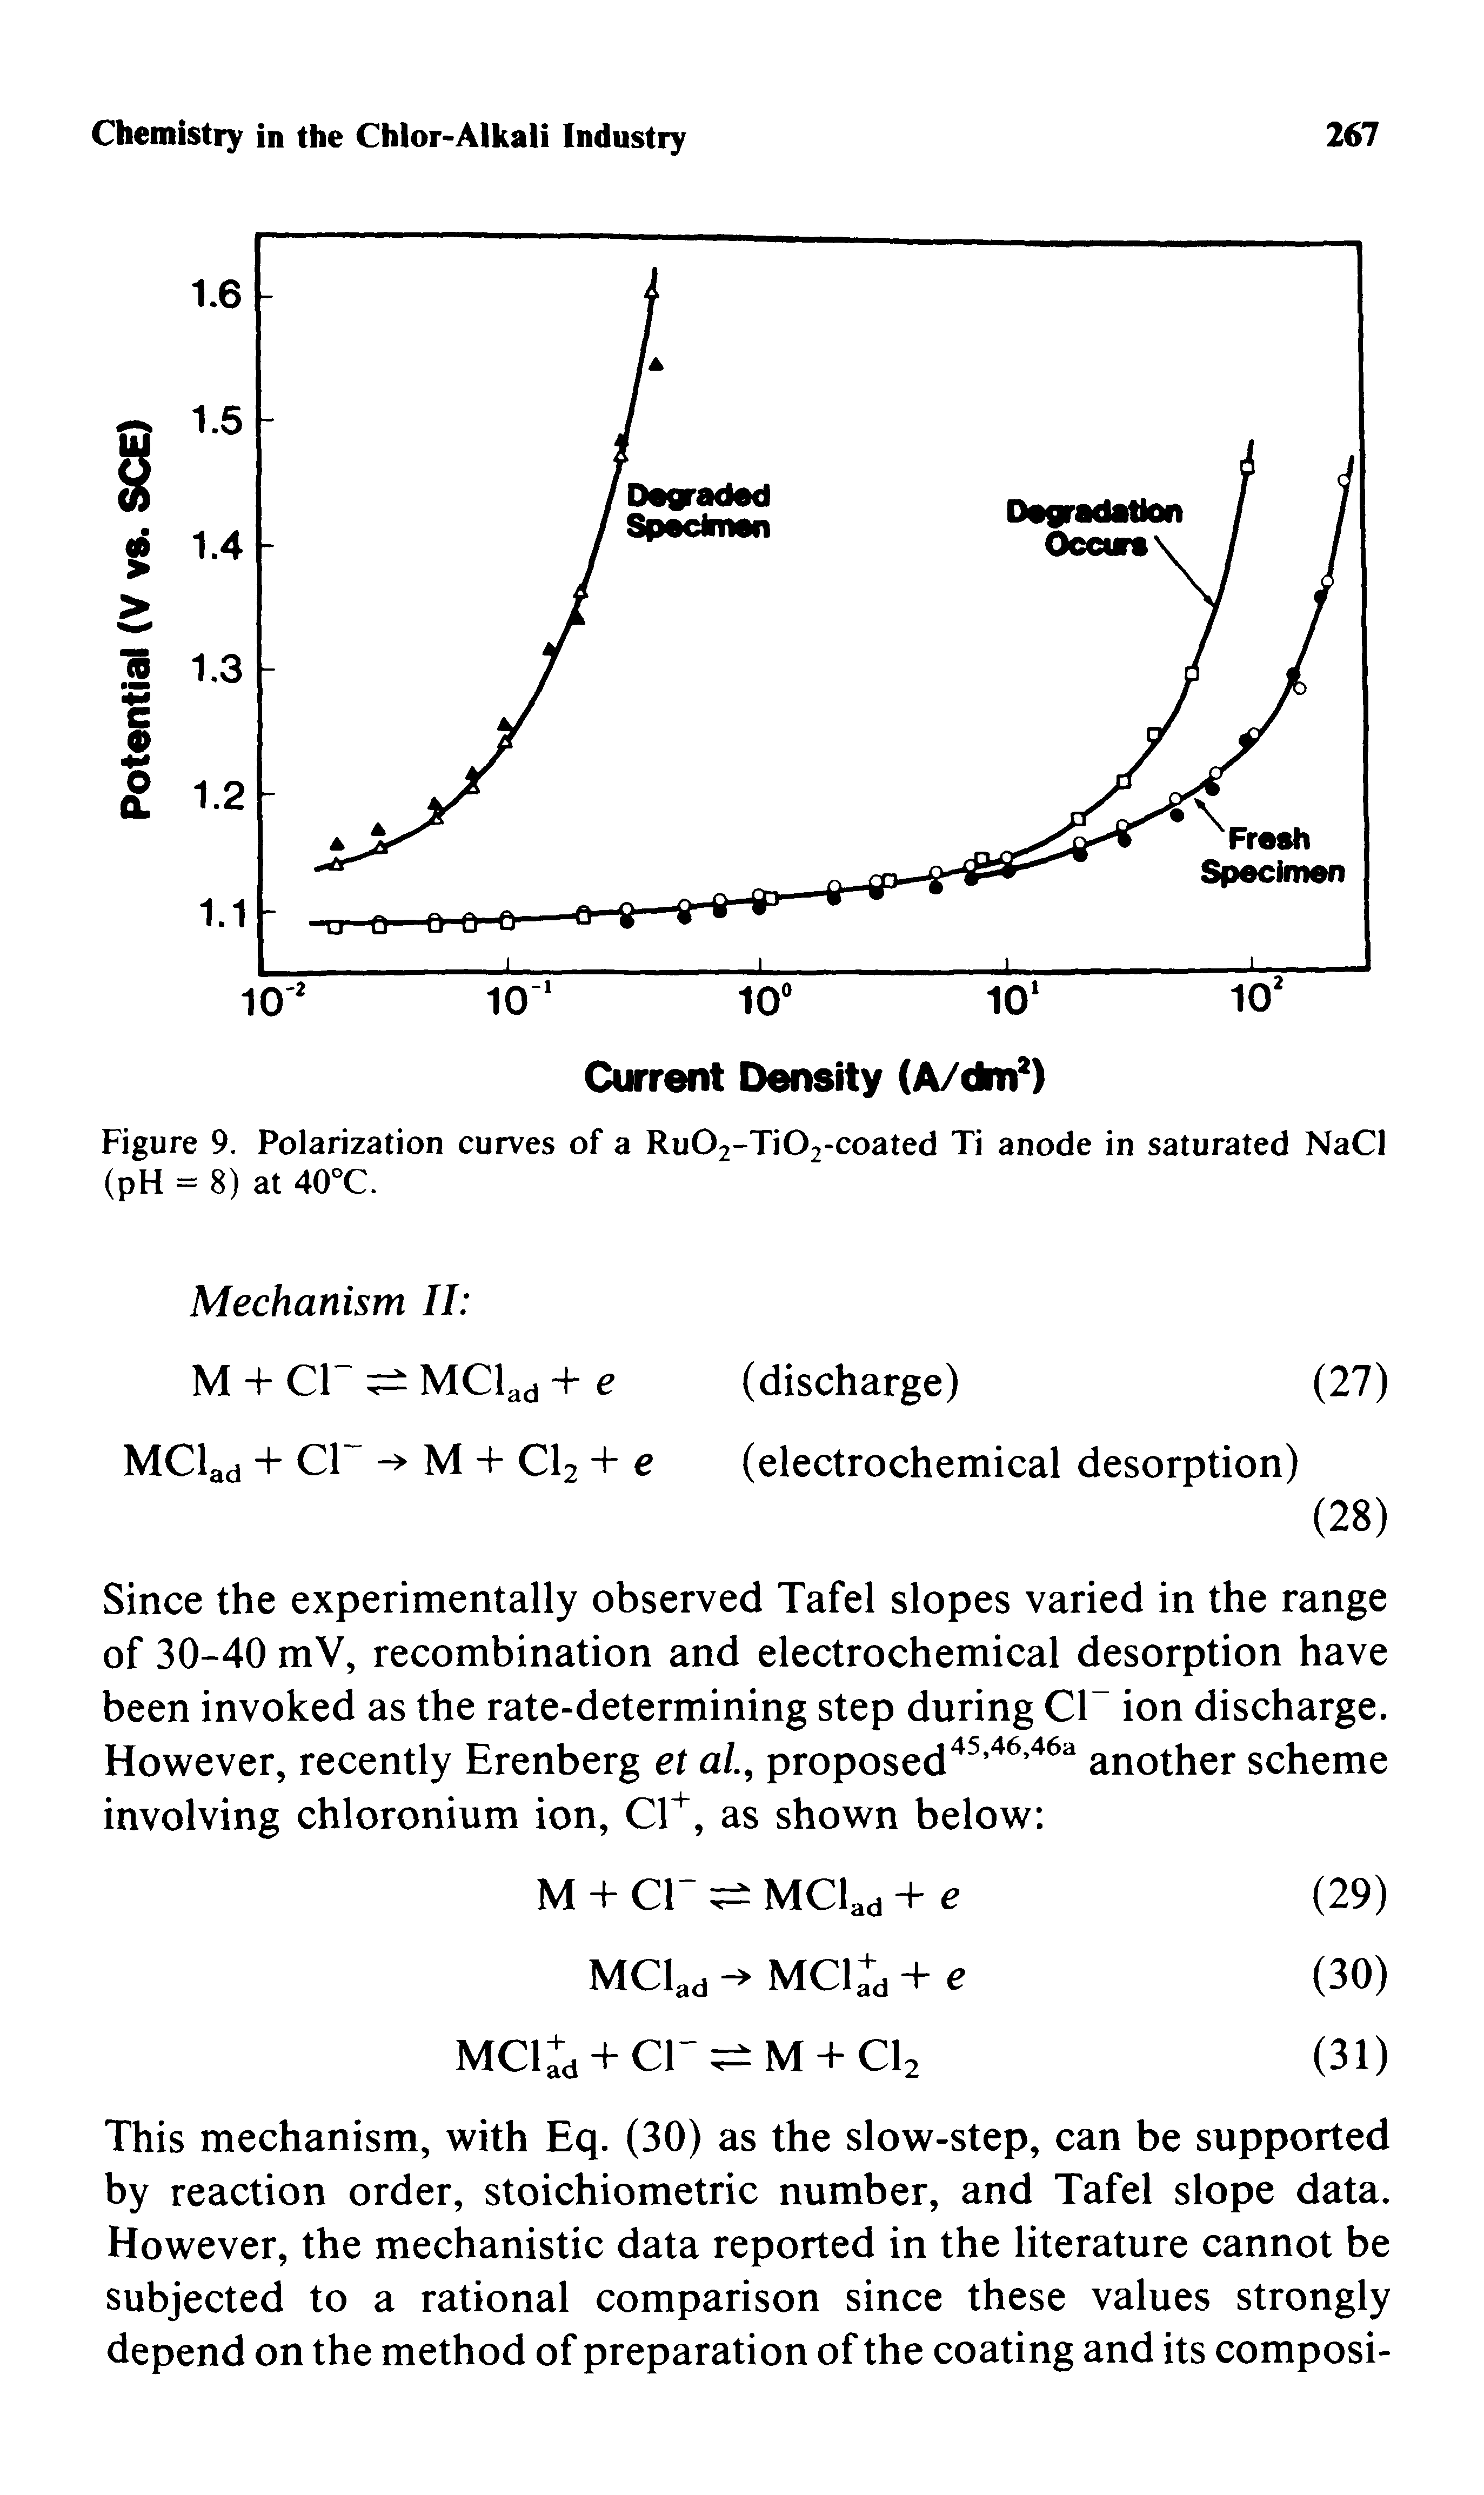 Figure 9. Polarization curves of a RuO2-TiO2-coated Ti anode in saturated NaCl (pH = 8) at 40°C.